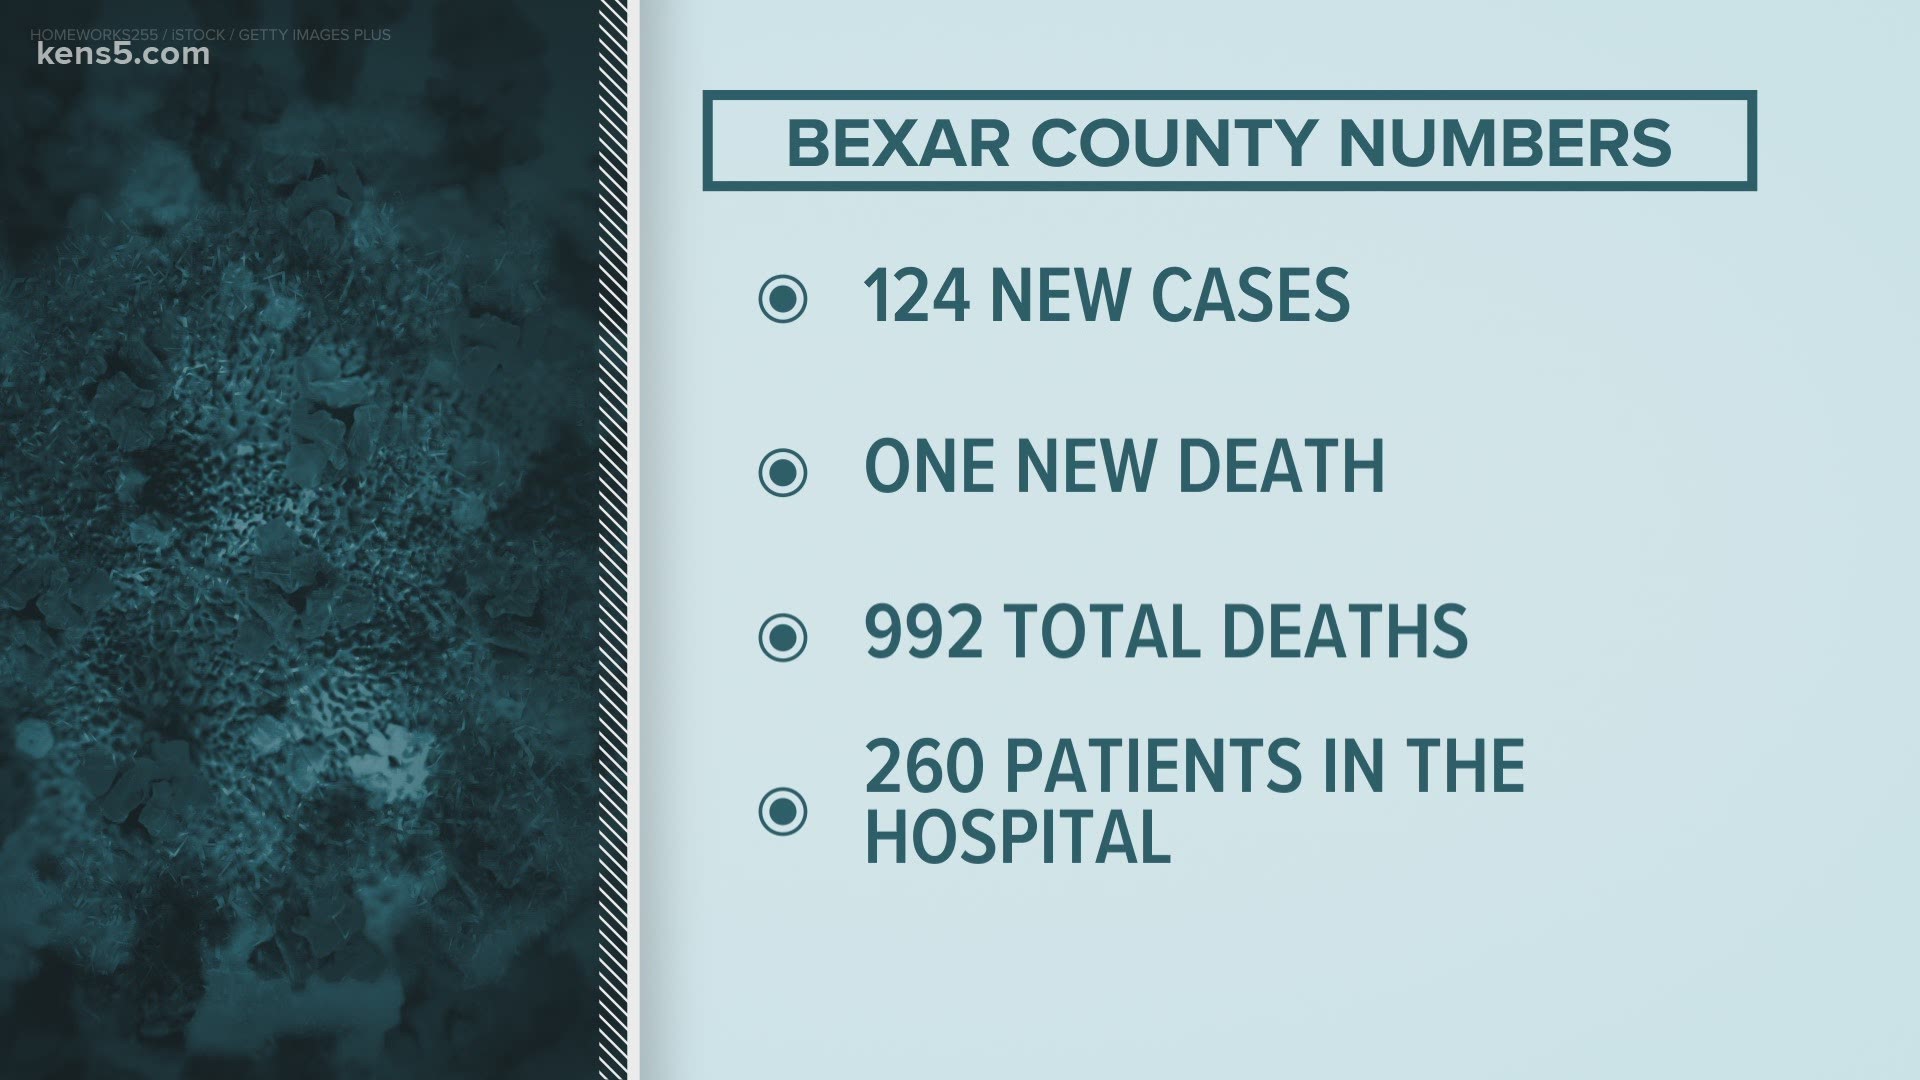 The metro is nearing 50,000 cases and 1,000 deaths from cOVID-19, although rates of infection and hospitalization continue to slow.